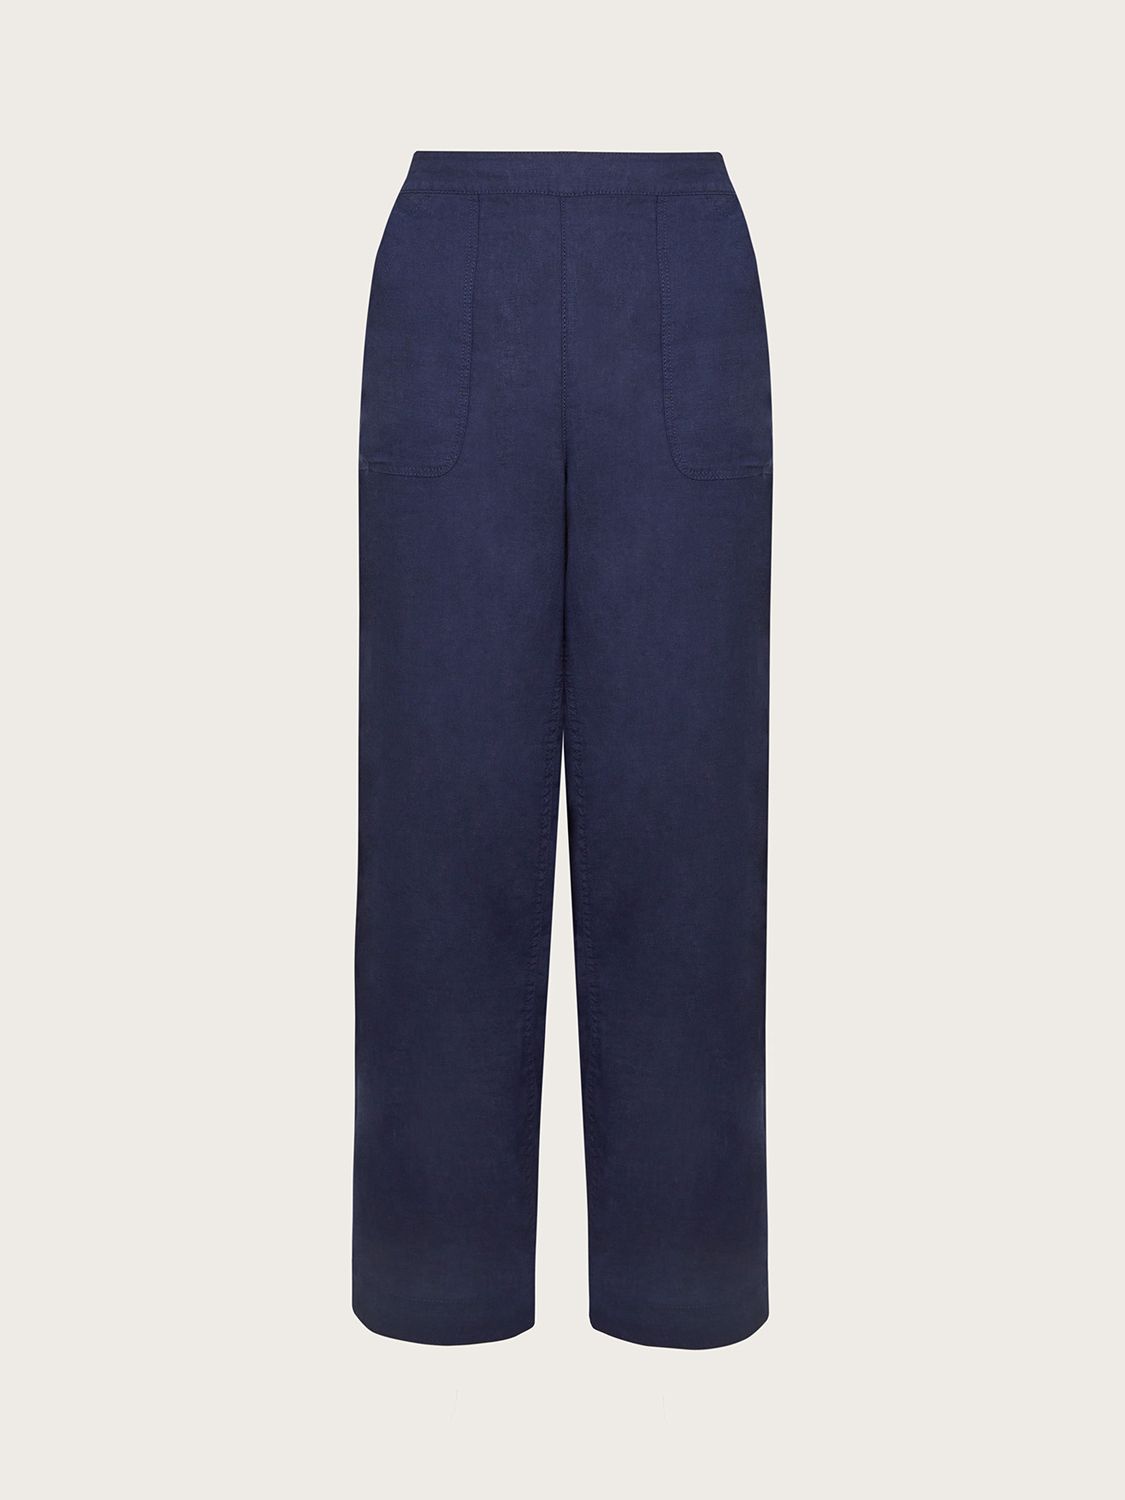 Monsoon Parker Linen Cropped Trousers, Navy, S